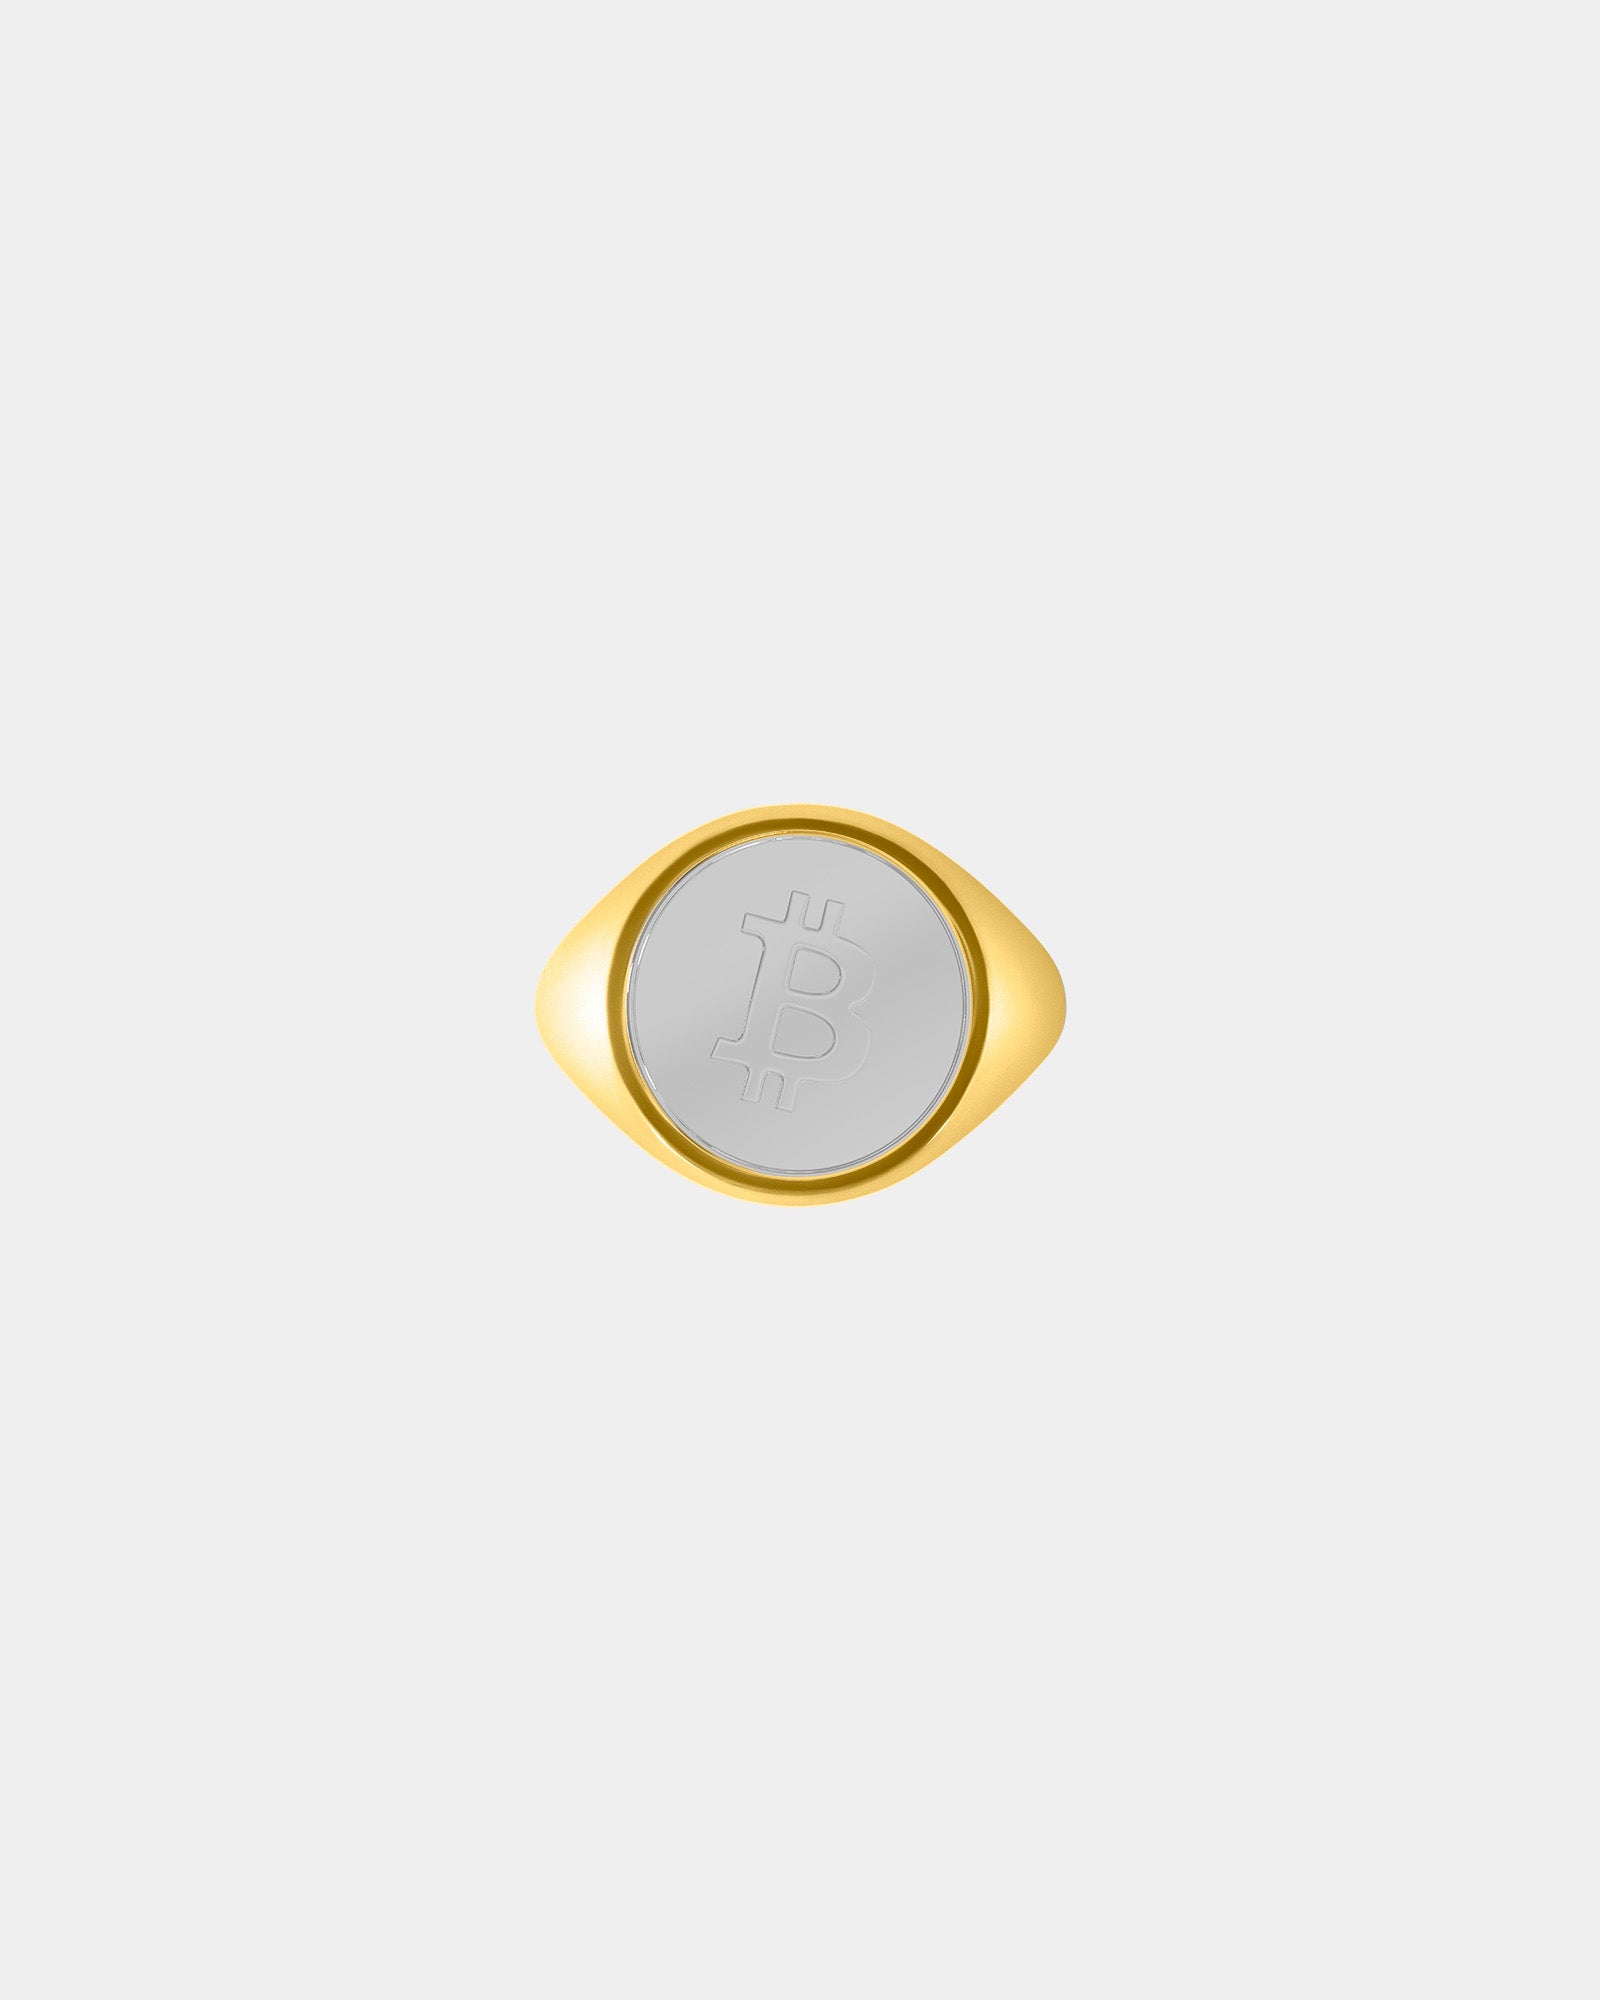 Large Bitcoin Crypto Ring in 9k Yellow Gold / Sterling Silver by Wilson Grant